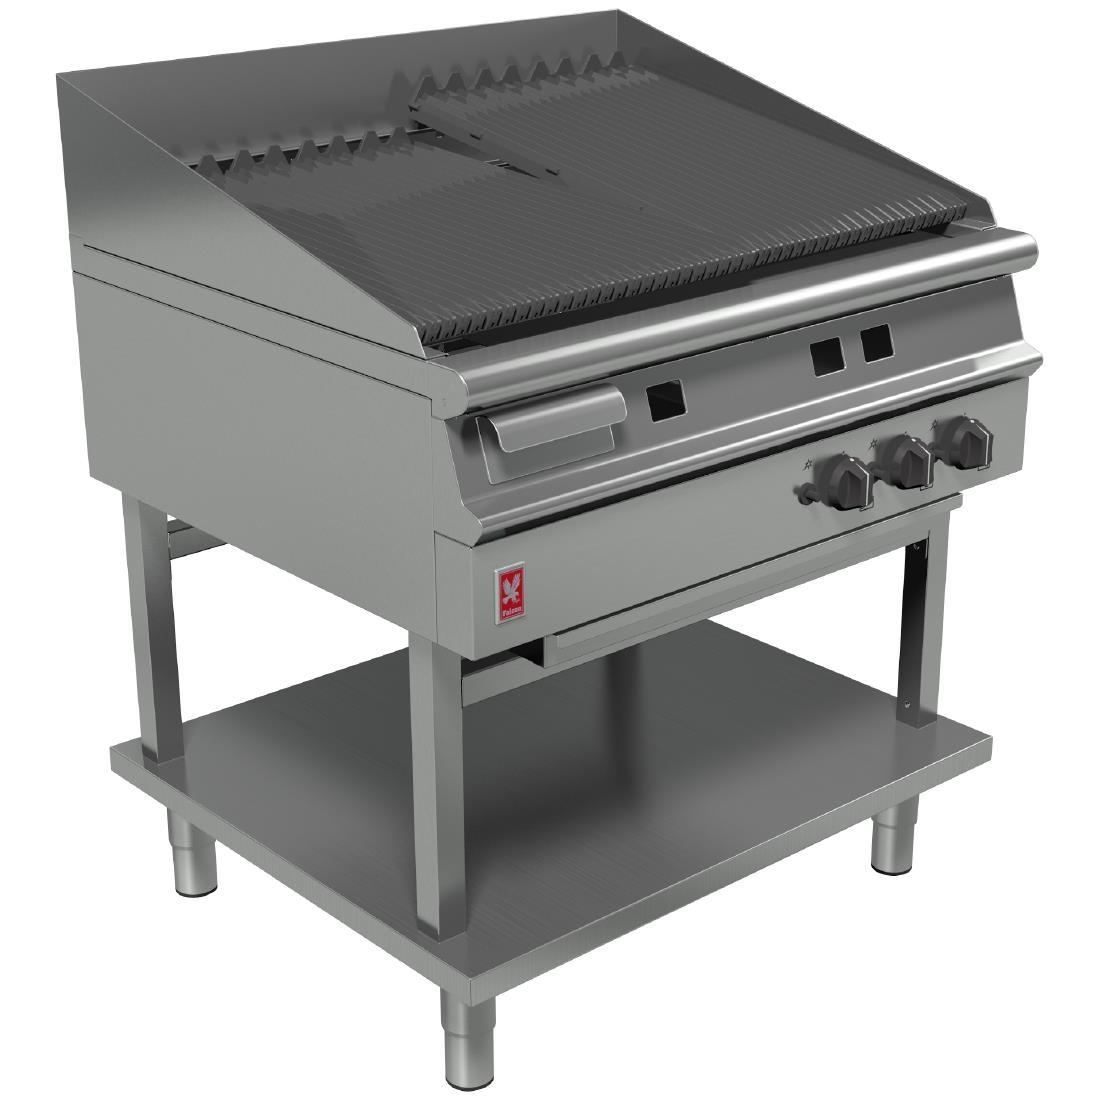 Falcon Dominator Plus Natural Gas Chargrill On Fixed Stand G3925 - GP027-N  - 1